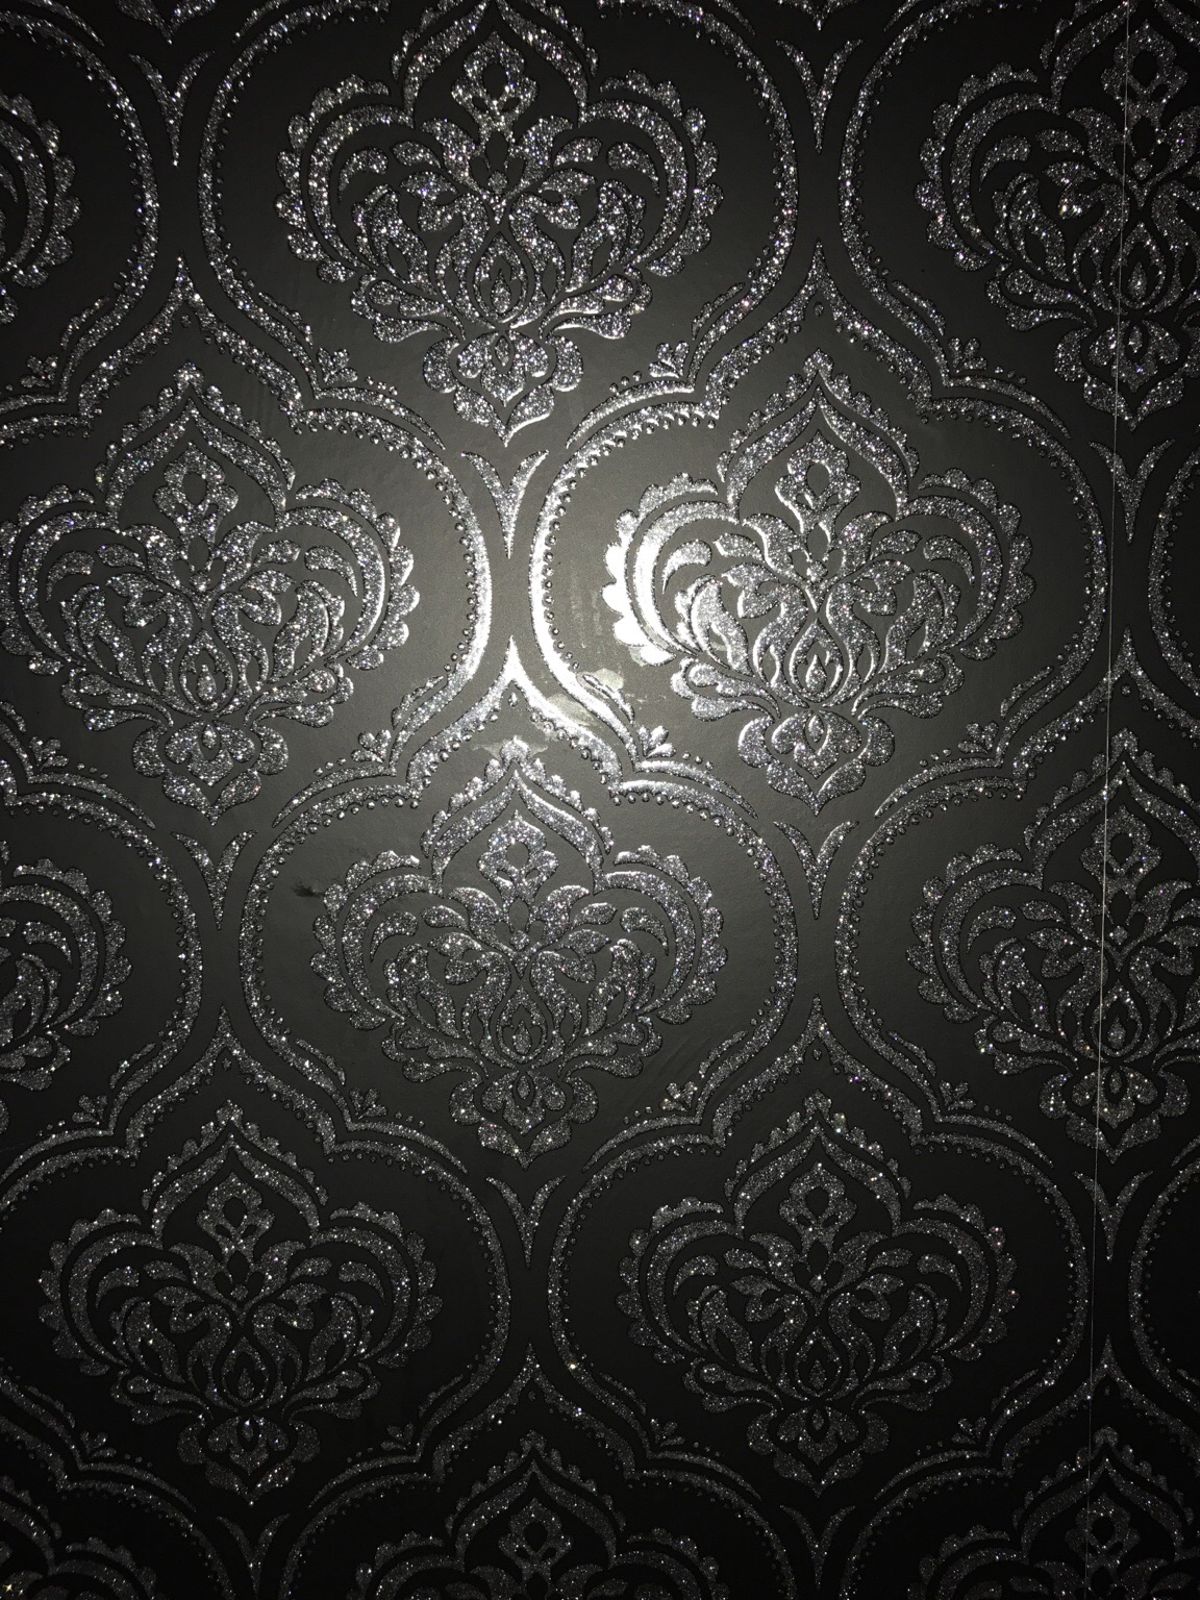 I Have 3 Unopened Rolls Of This Wallpaper
i Paid £15 - Black And Silver Glitter - HD Wallpaper 